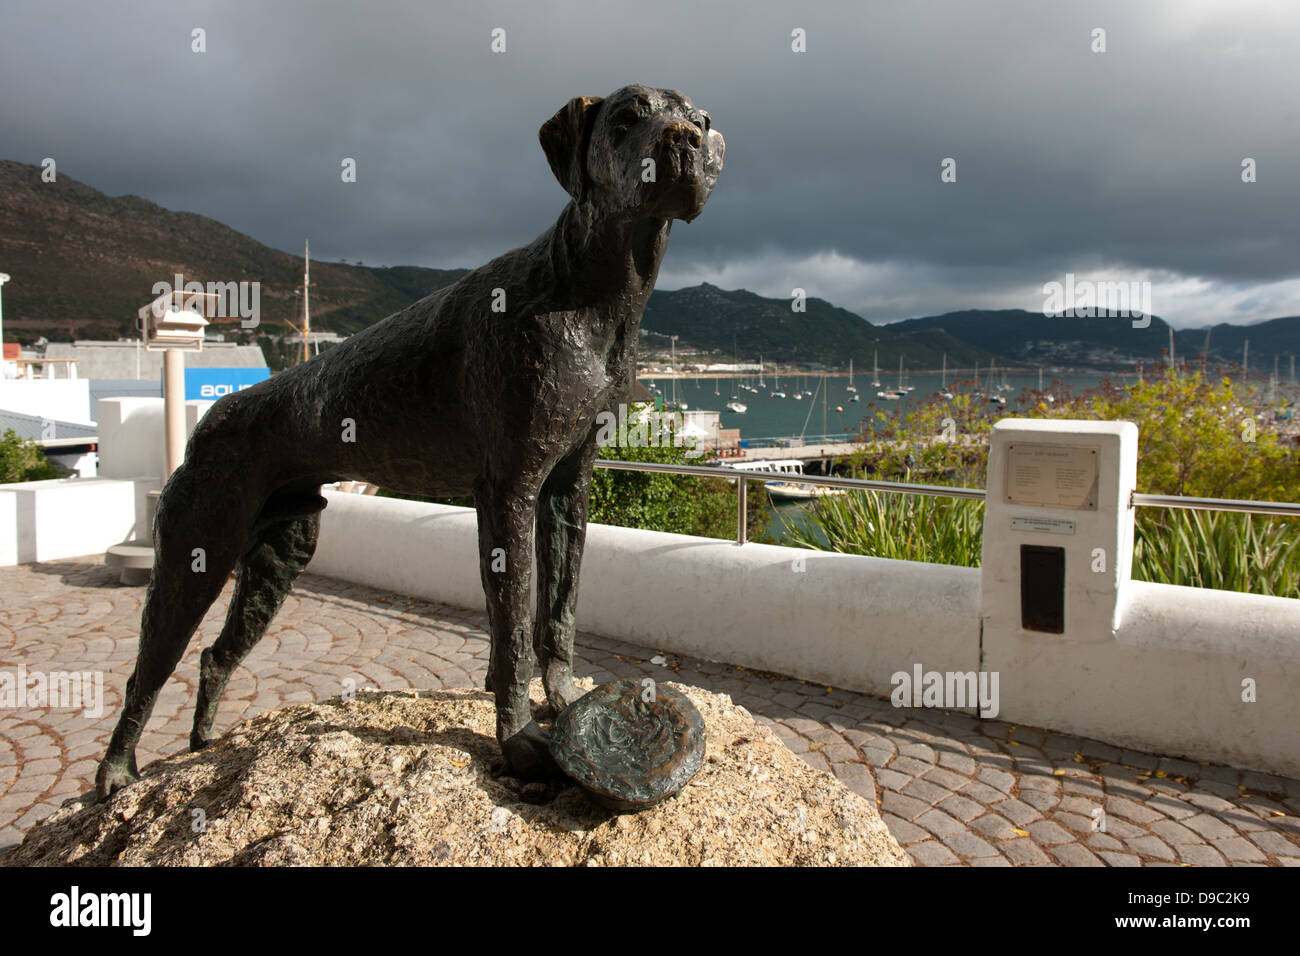 Statue of Just Nuisance, Jubilee Square, Simon's Town, False Bay, South Africa Stock Photo